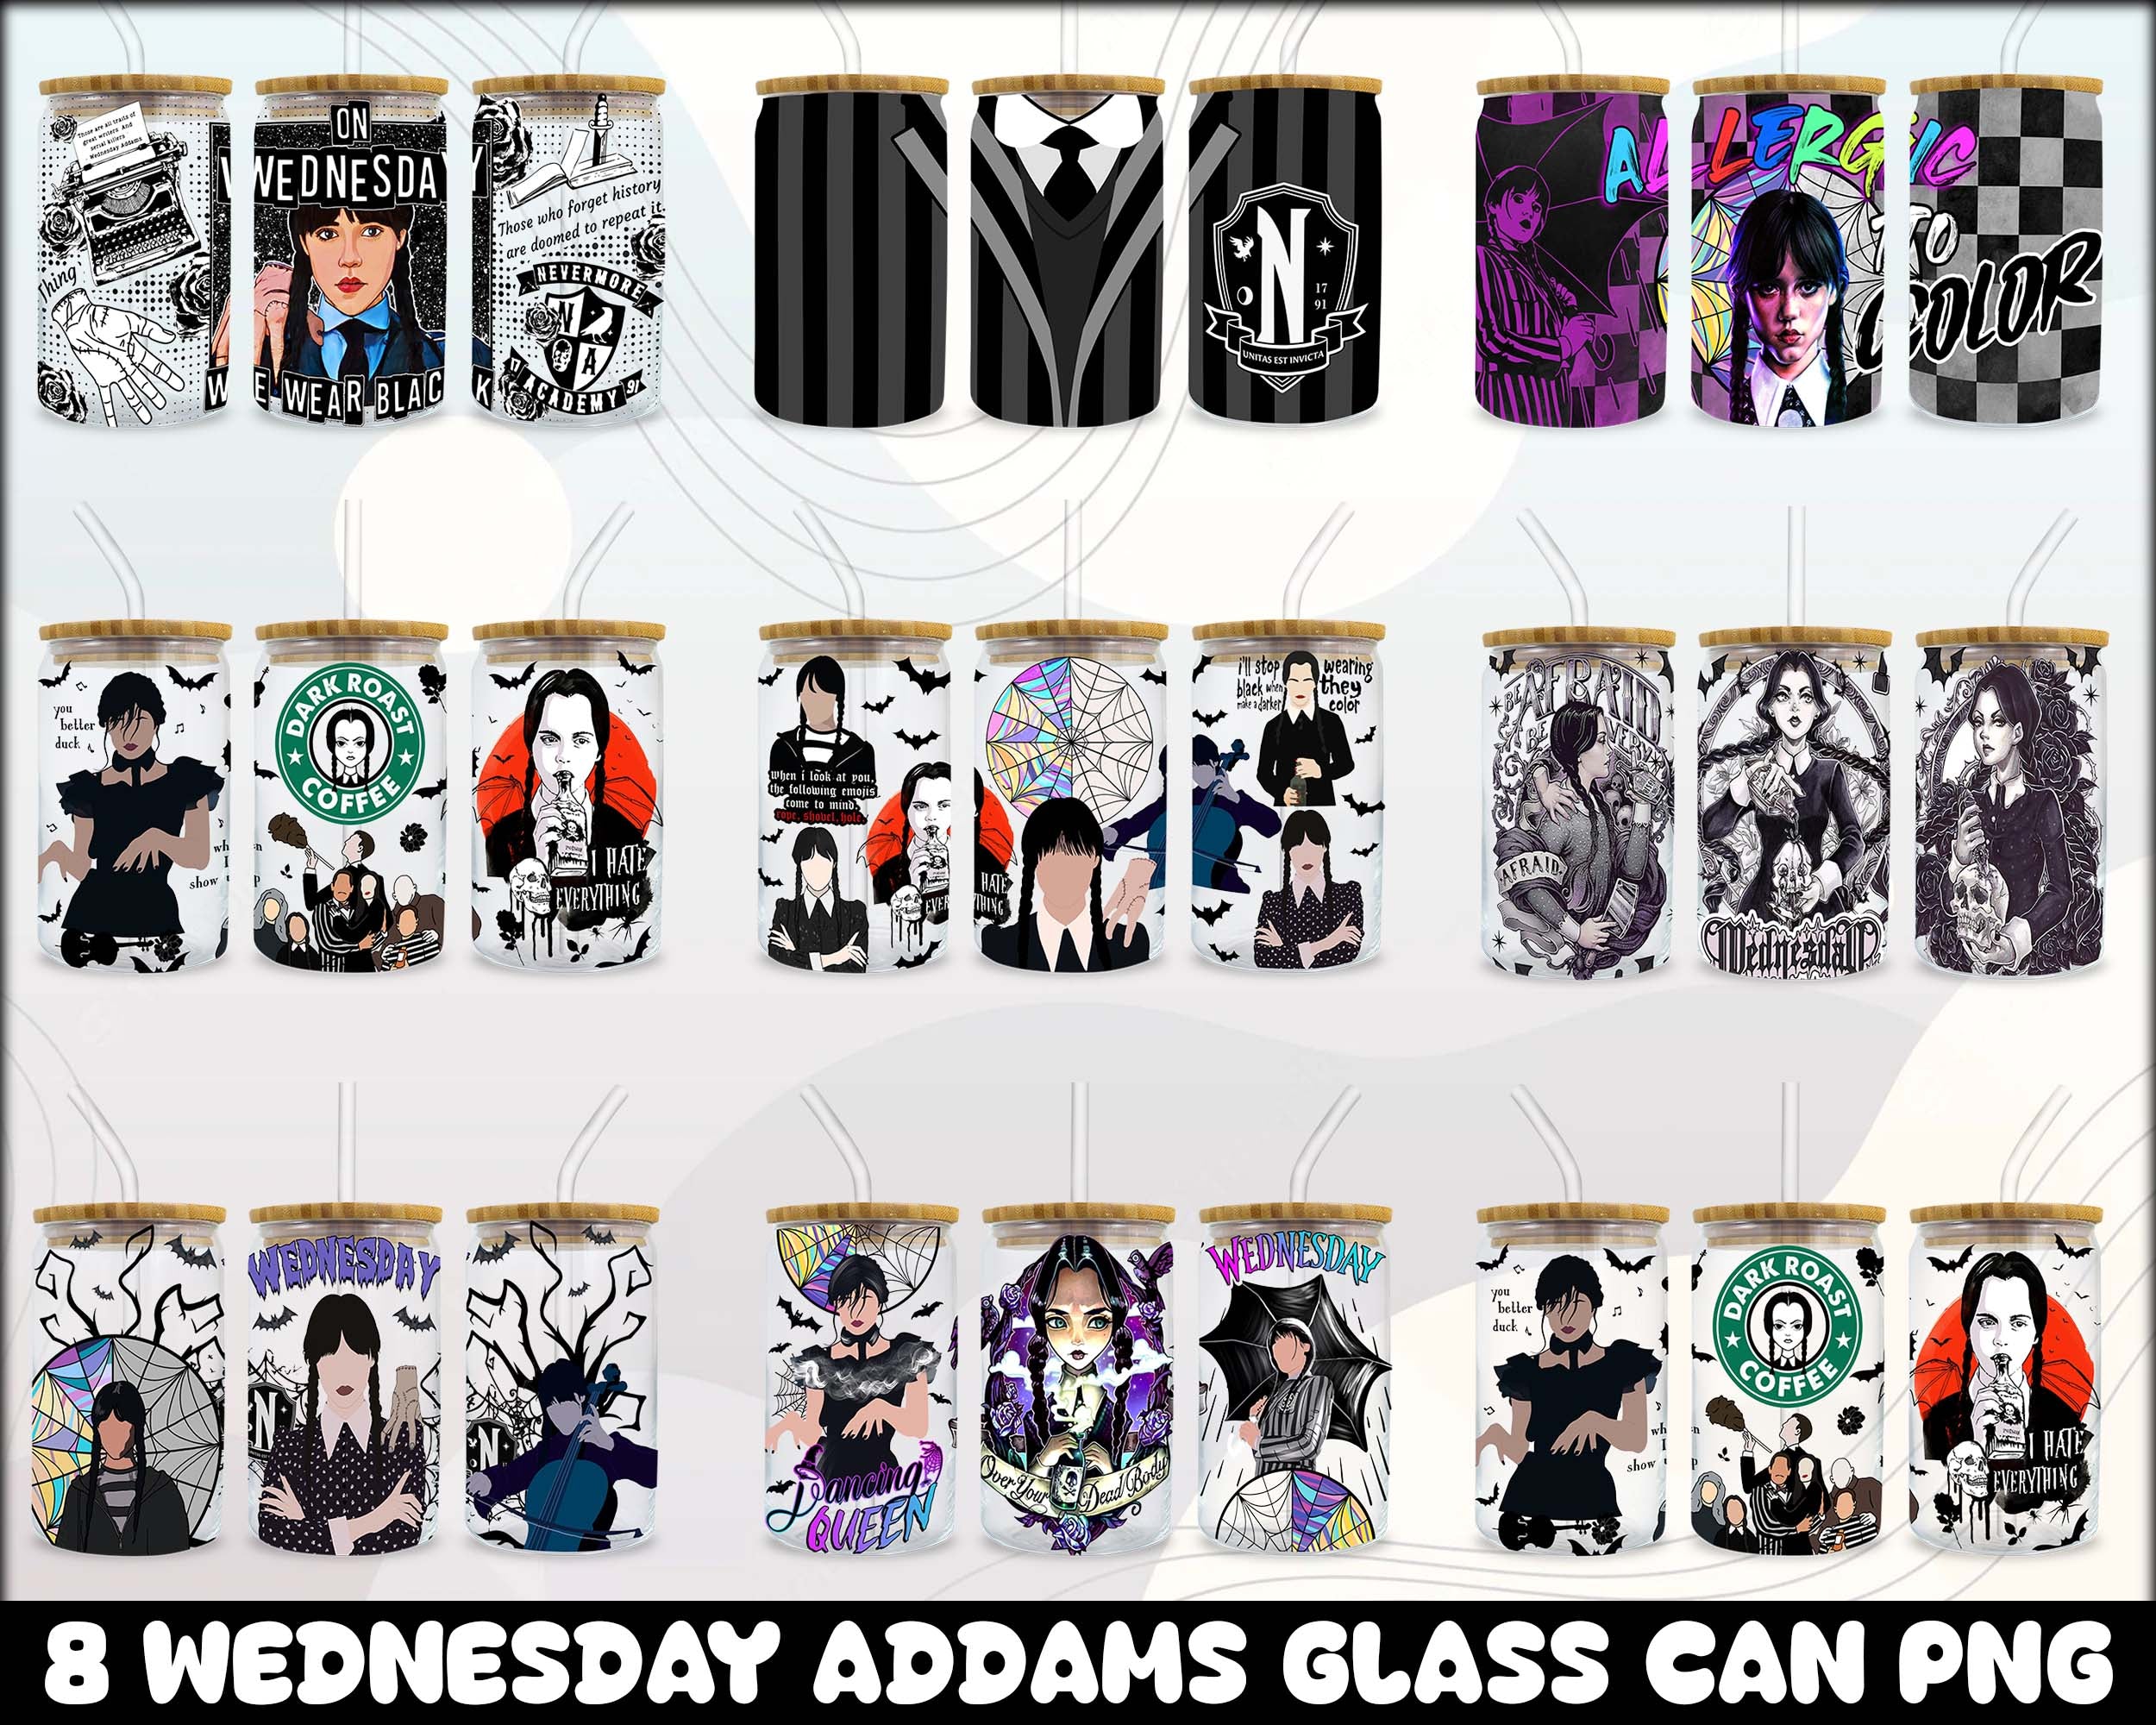 Version 2 - 8 Wednesday Addams Glass Can Wrap PNG, 16oz Libbey Can Glass, Addams Sublimation bundle